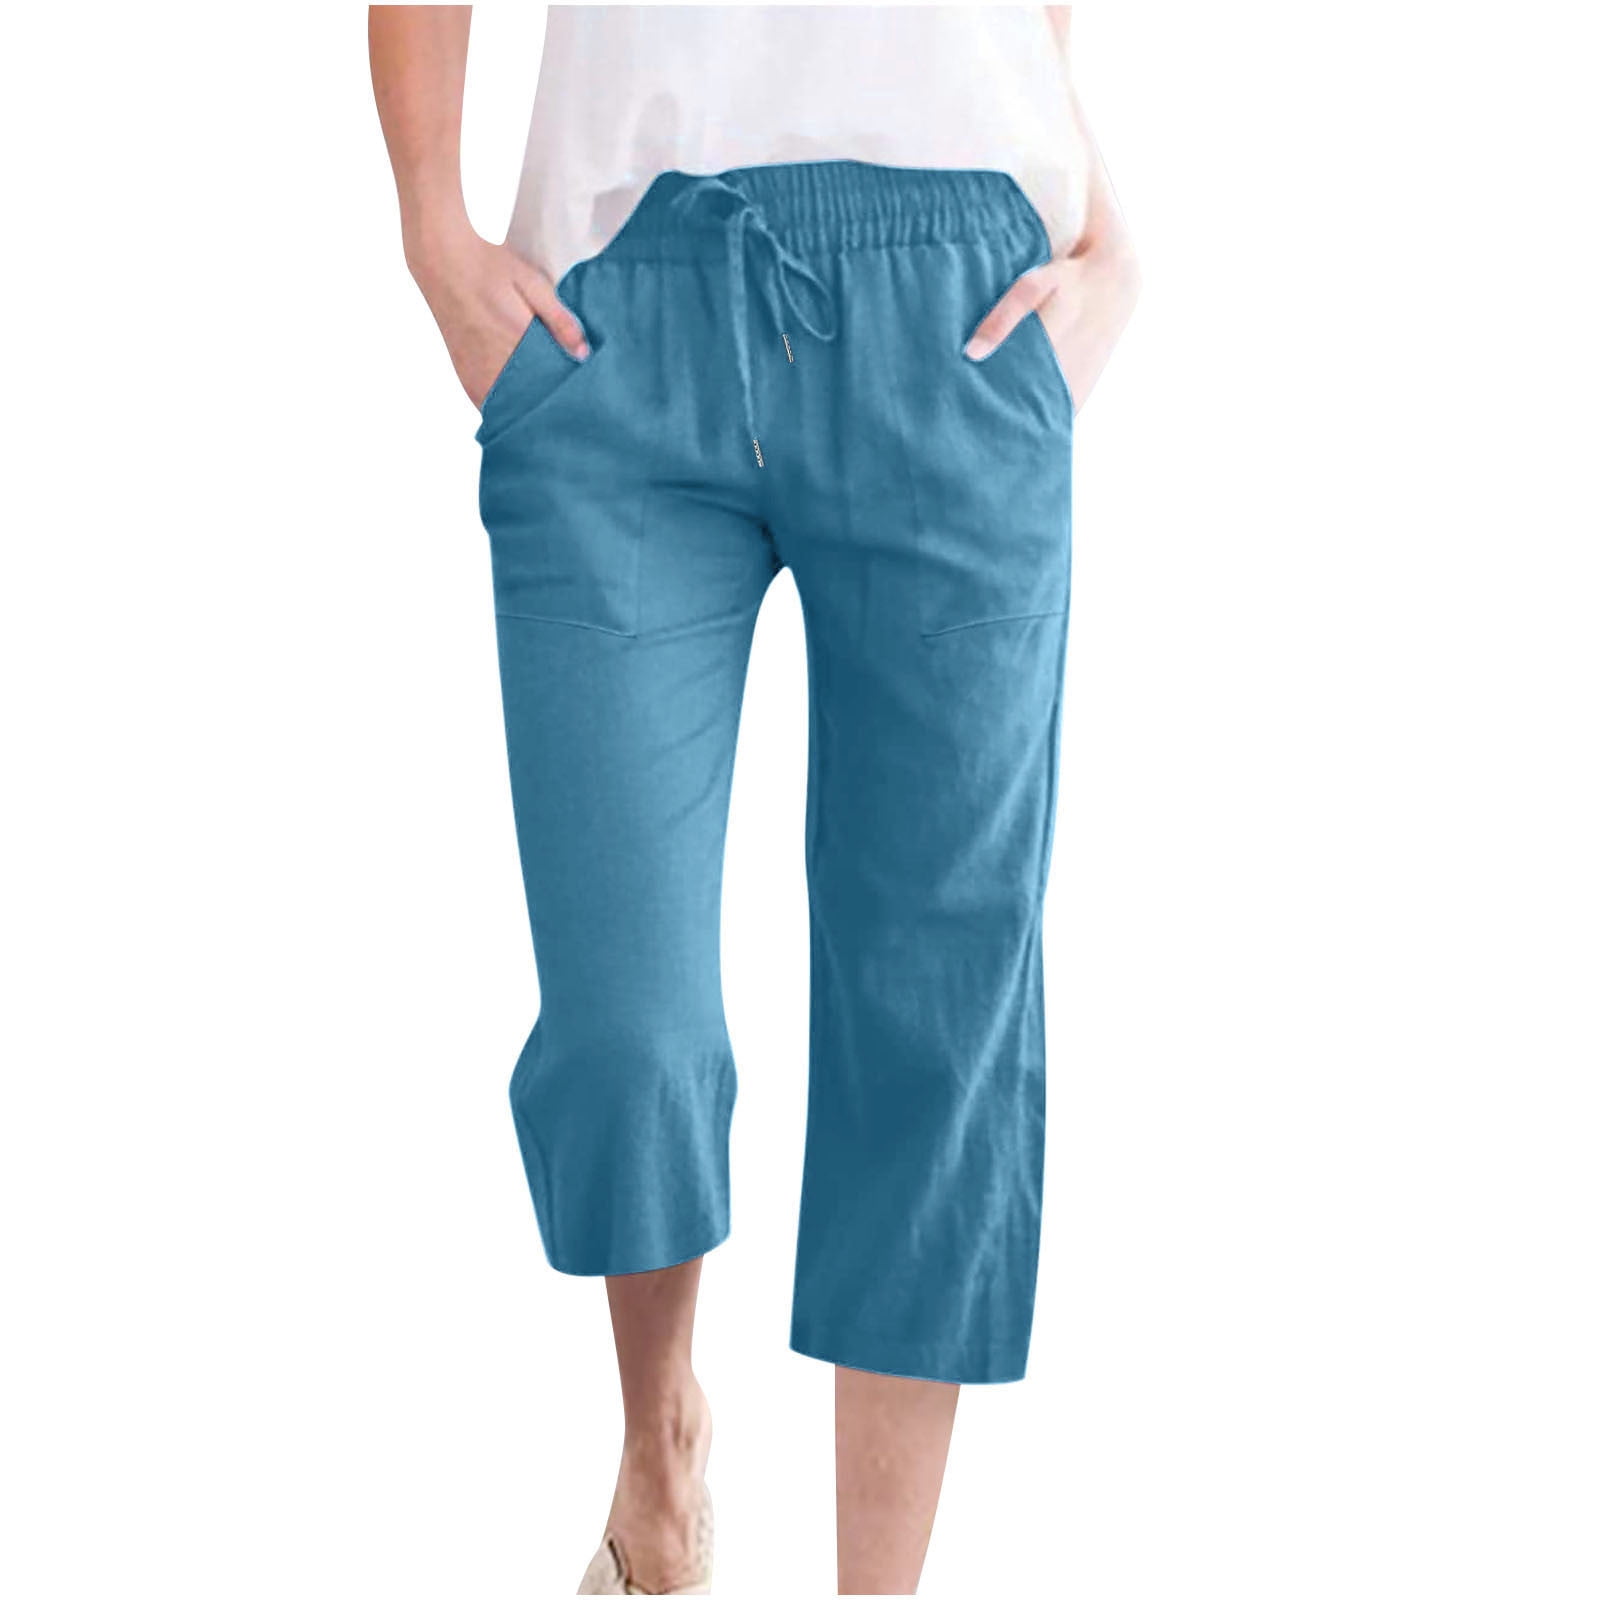 Buy Kcocoo Womens Capri Pants Loose Cropped Wide Leg Pants Dandelion Comfy  Elastic Waist Lightweight Trousers with Pockets Mint Green XLarge at  Amazonin